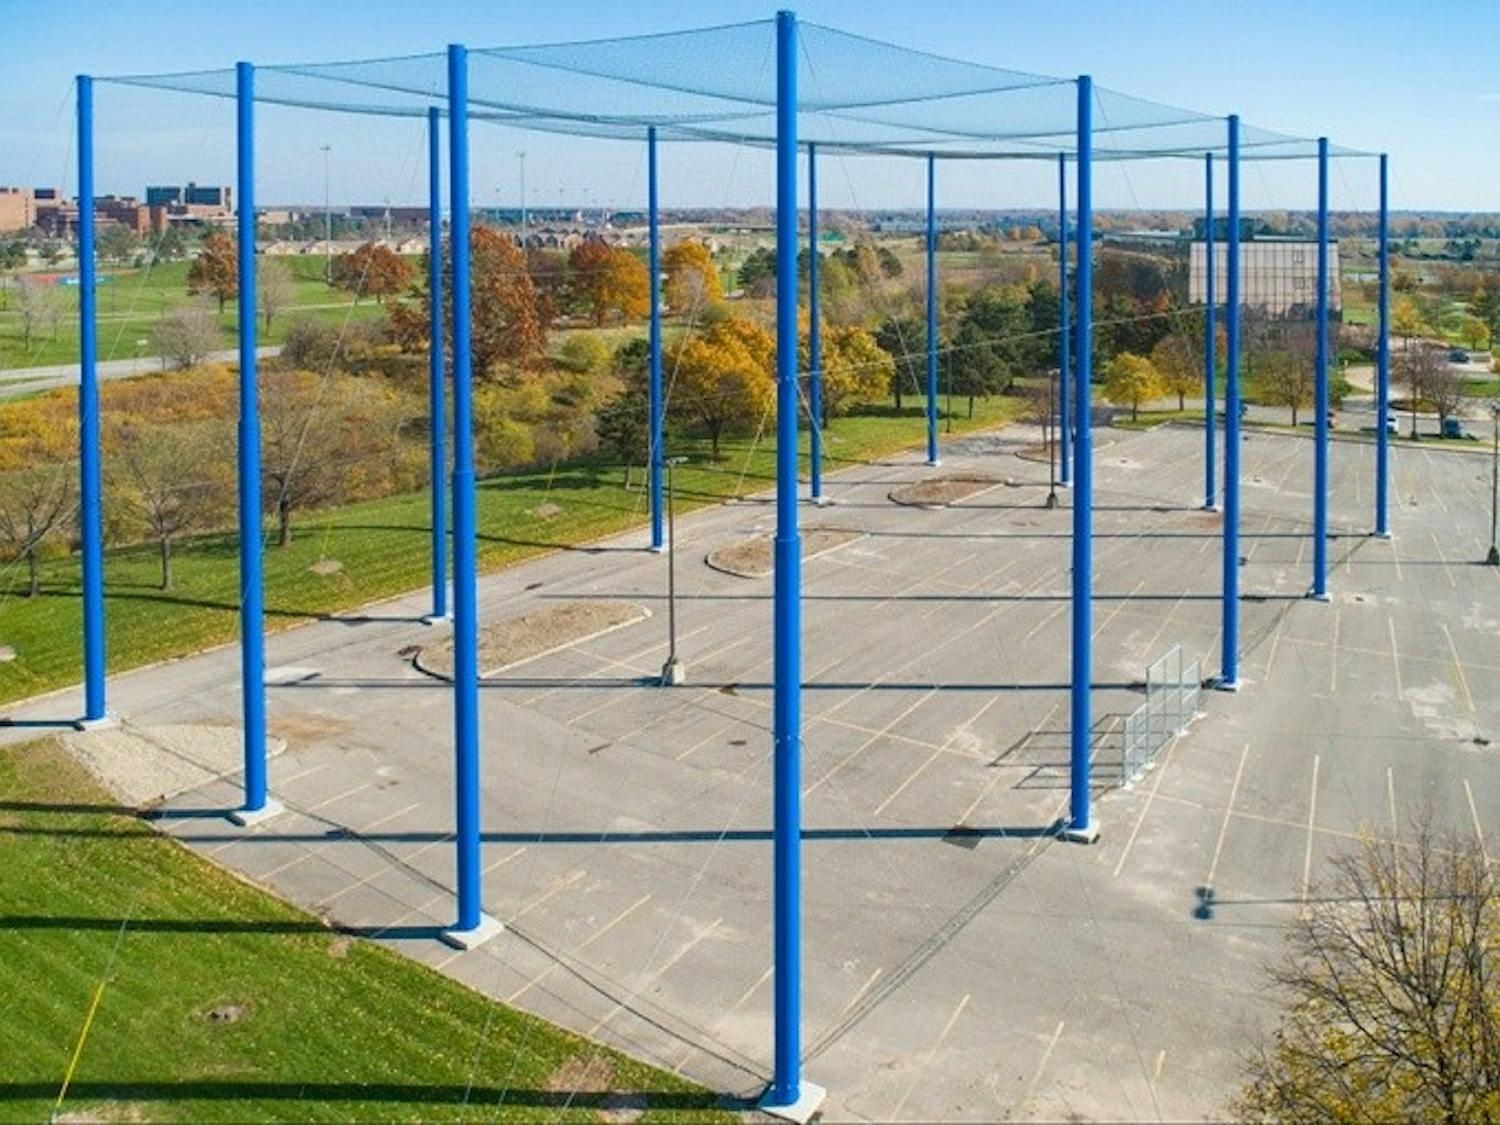 The 24,000-square-foot netted enclosure will be used to research uncrewed aerial vehicles